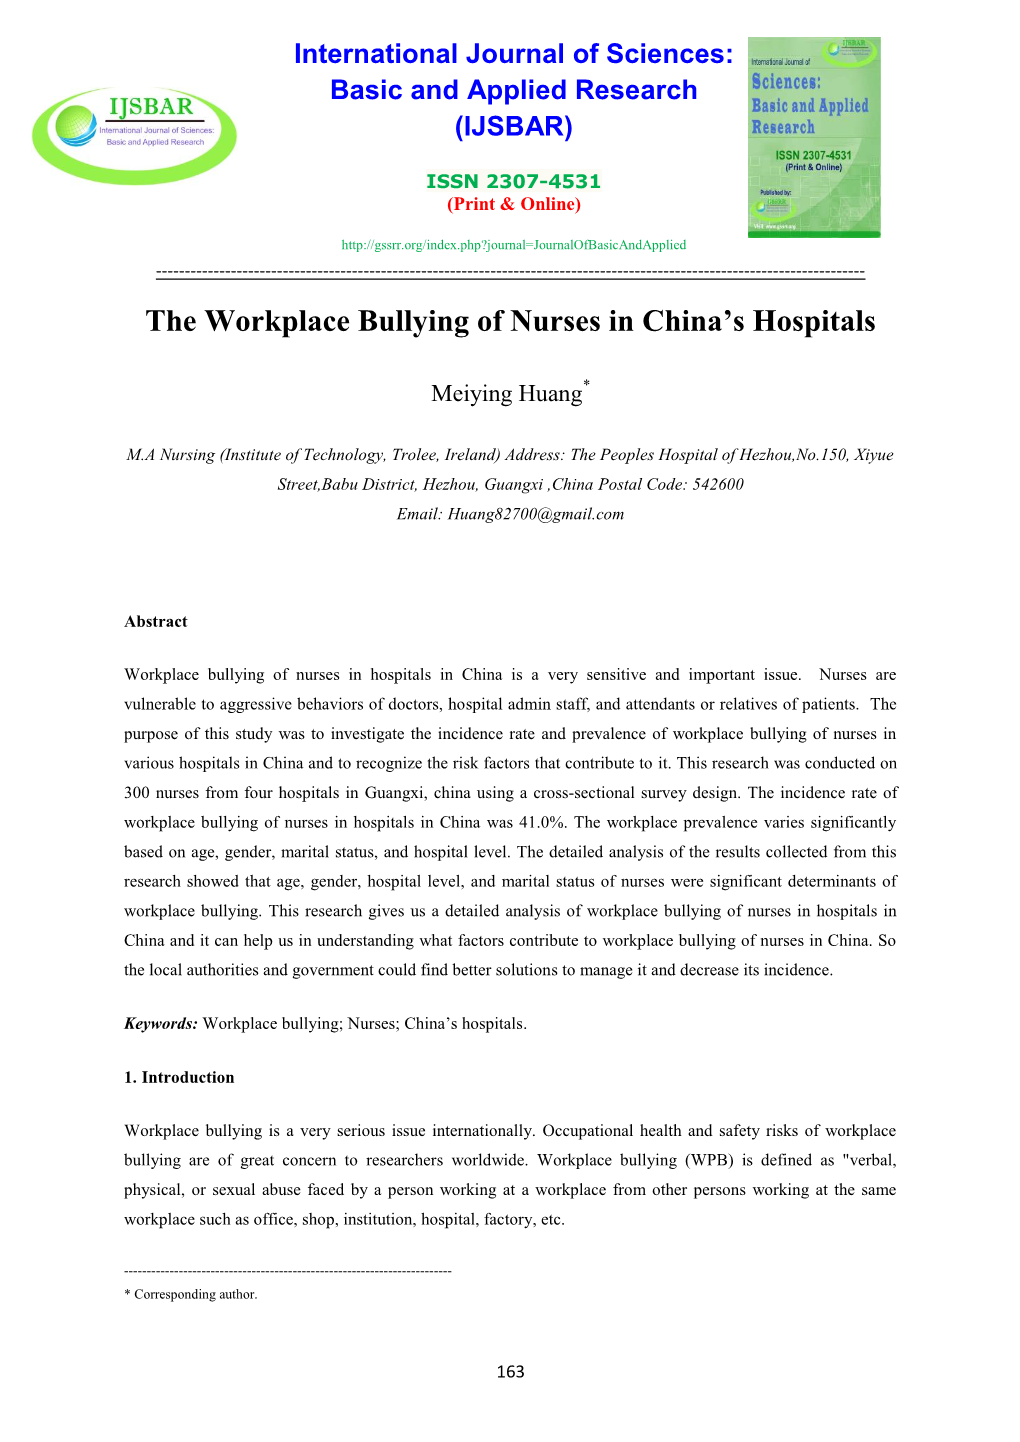 The Workplace Bullying of Nurses in China's Hospitals